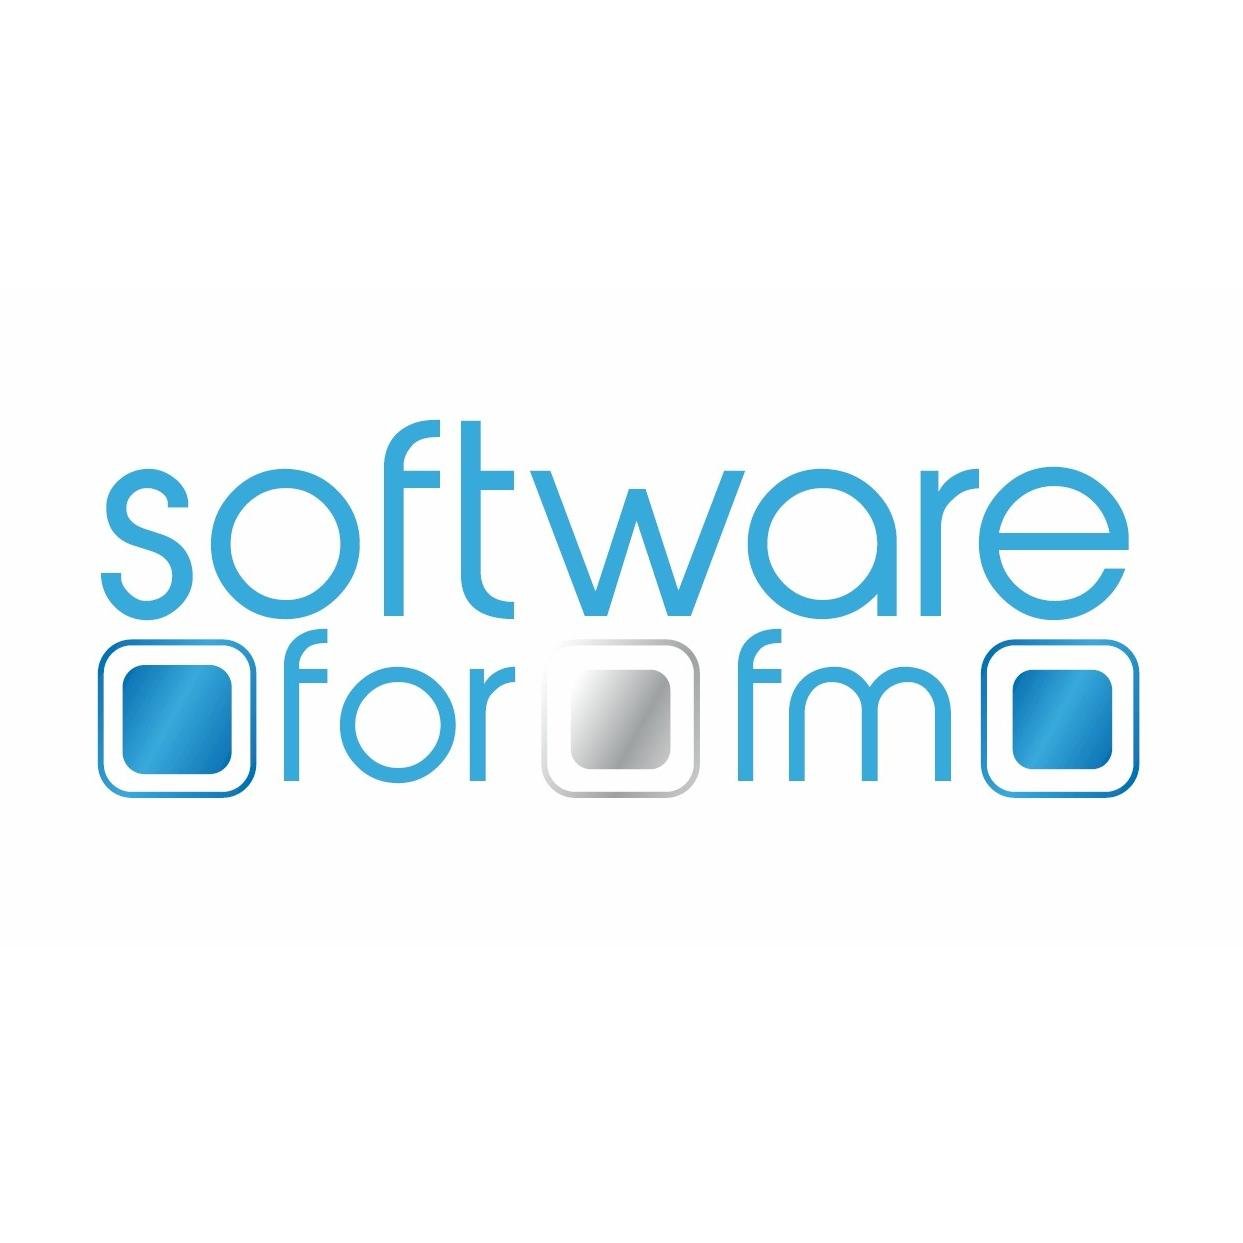 Software for FM Ltd . Complete Facilities Management Software Solution. Networking/Hardware/Consultancy

#giveitago